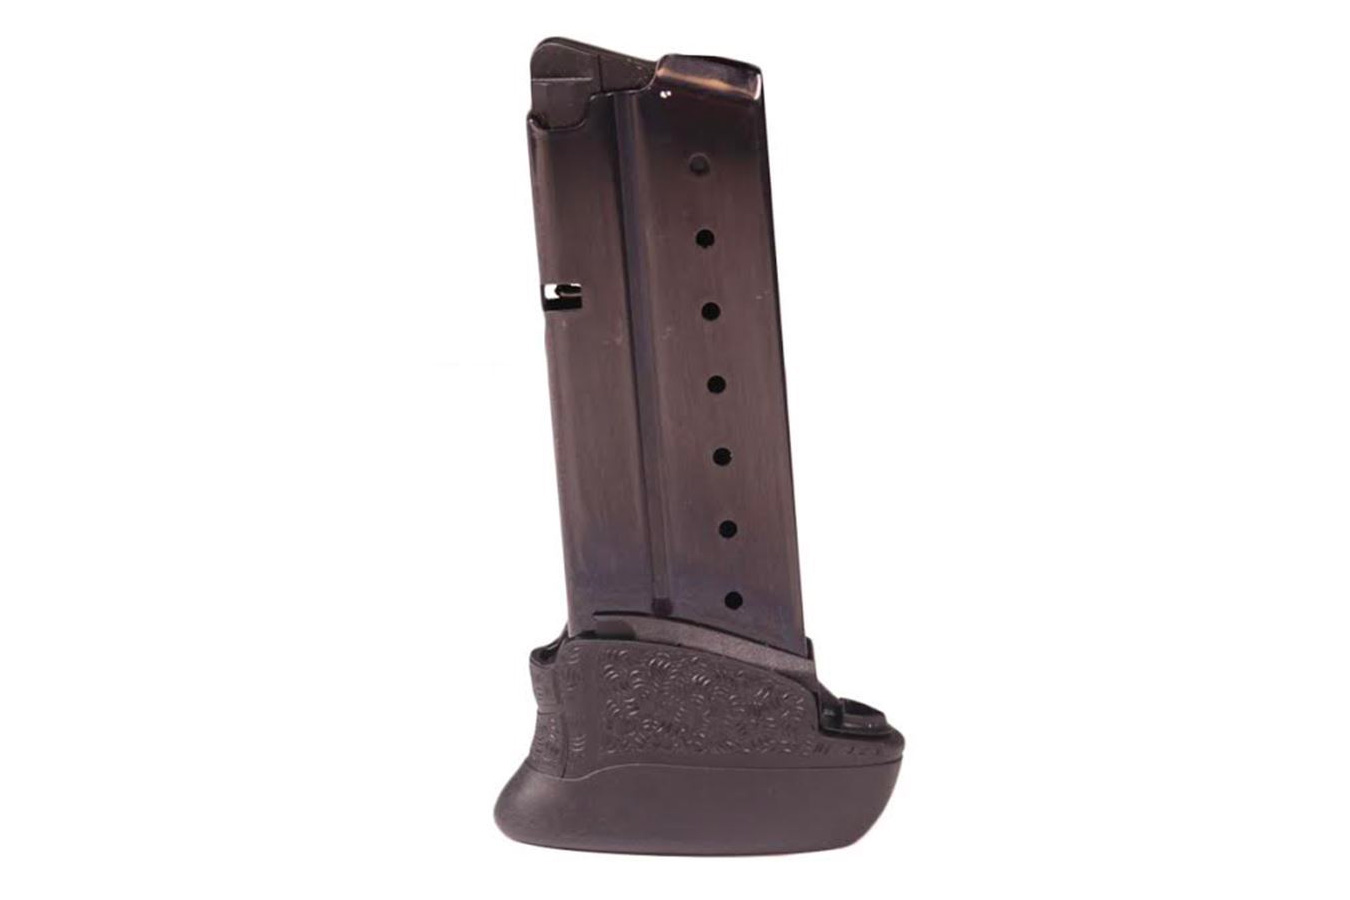 WALTHER PPS M2 9MM 8-ROUND FACTORY MAGAZINE (LAW ENFORCEMENT MODEL)